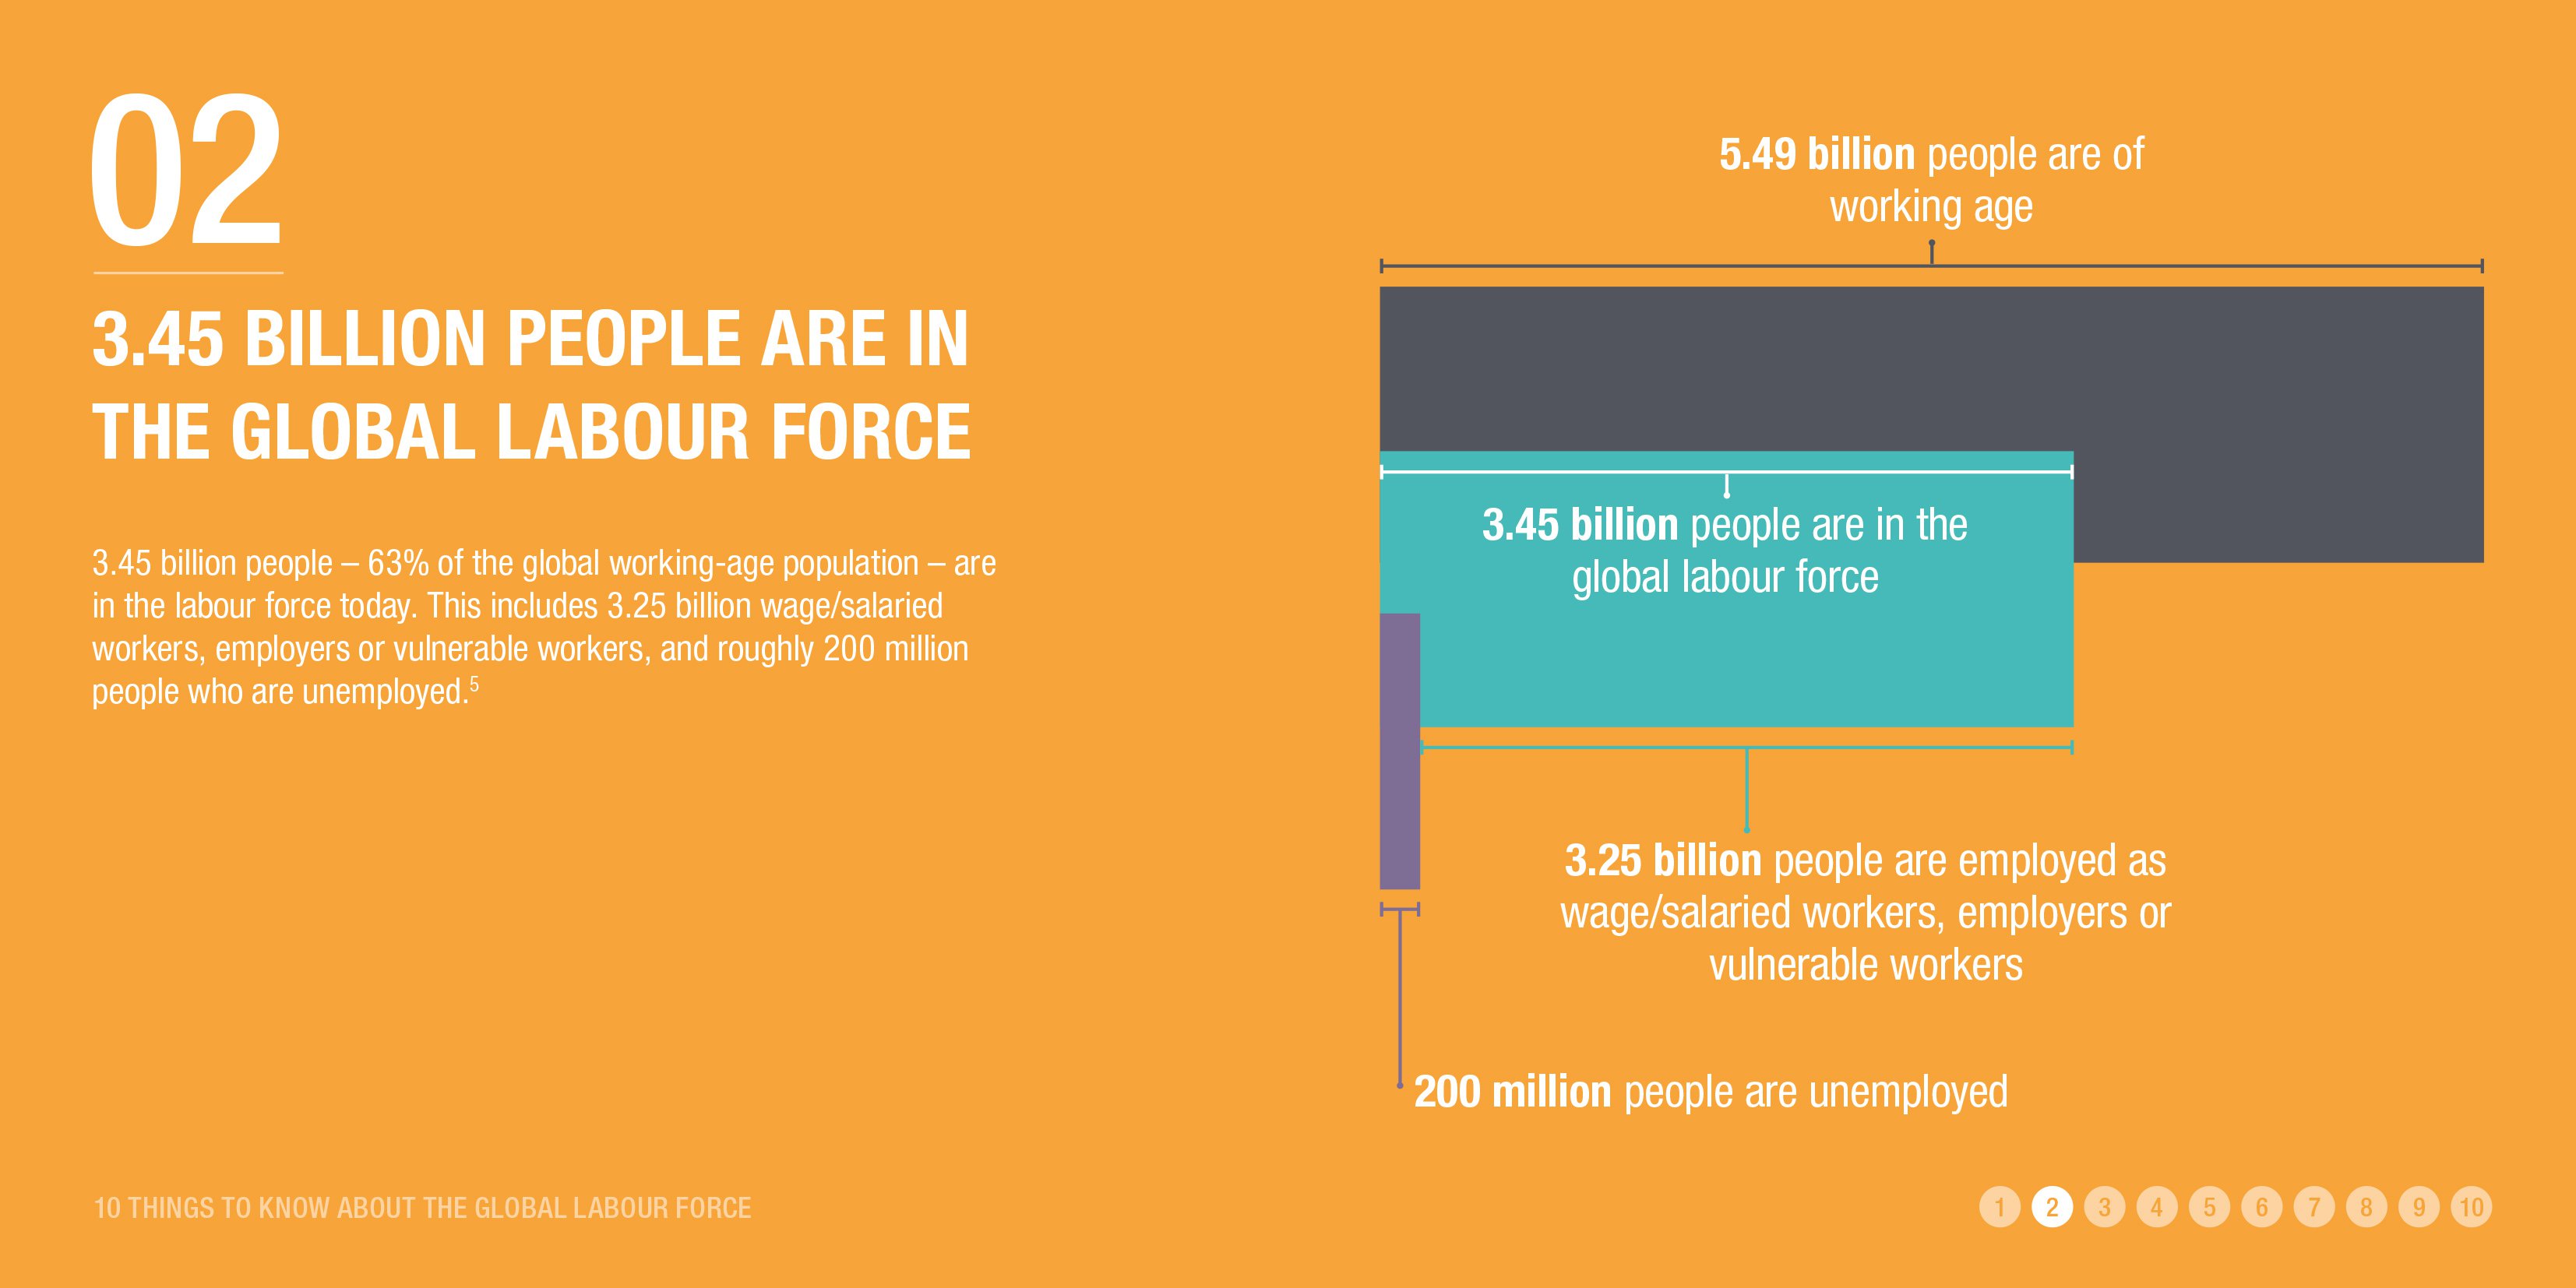 3.45 billion people are in the global labour force